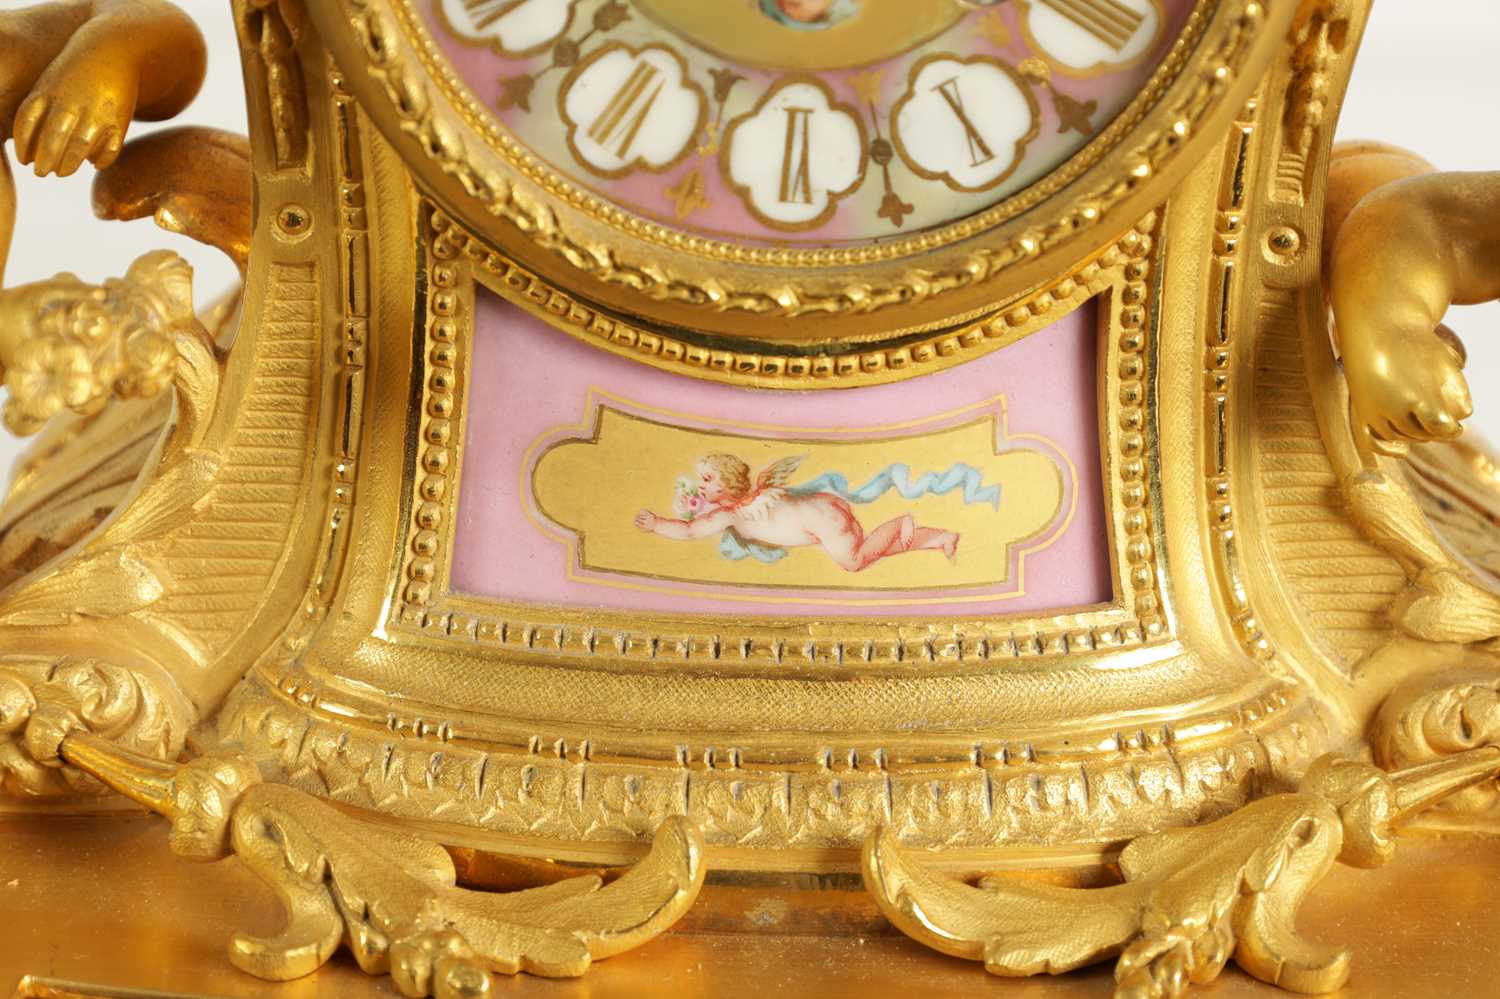 A LATE 19TH CENTURY FRENCH ORMOLU AND PORCELAIN PANELLED FIGURAL MANTEL CLOCK - Image 5 of 12